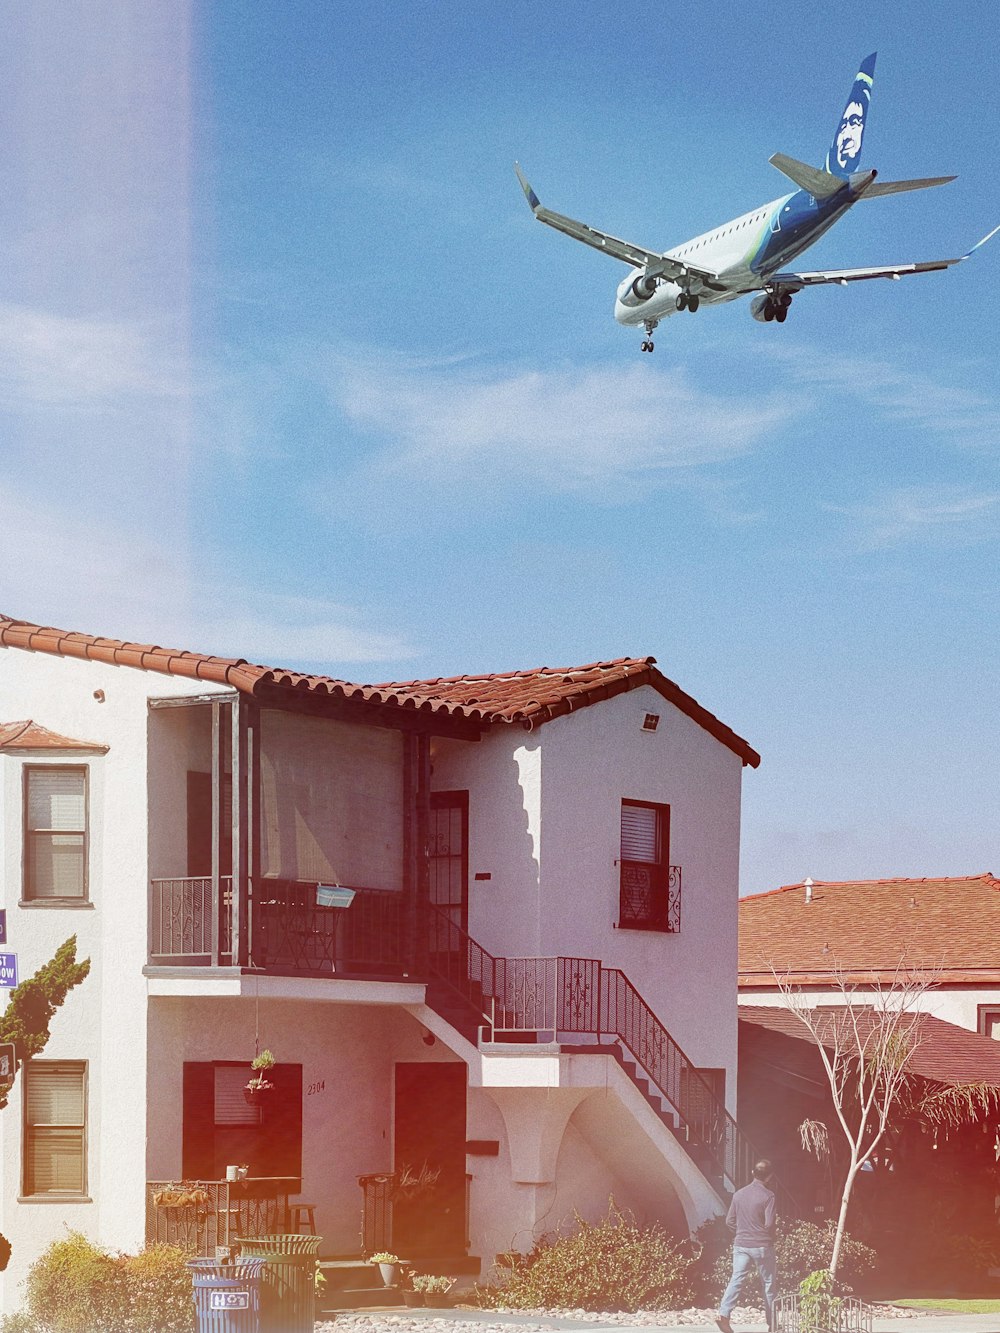 an airplane flying over a building with a balcony and balconies